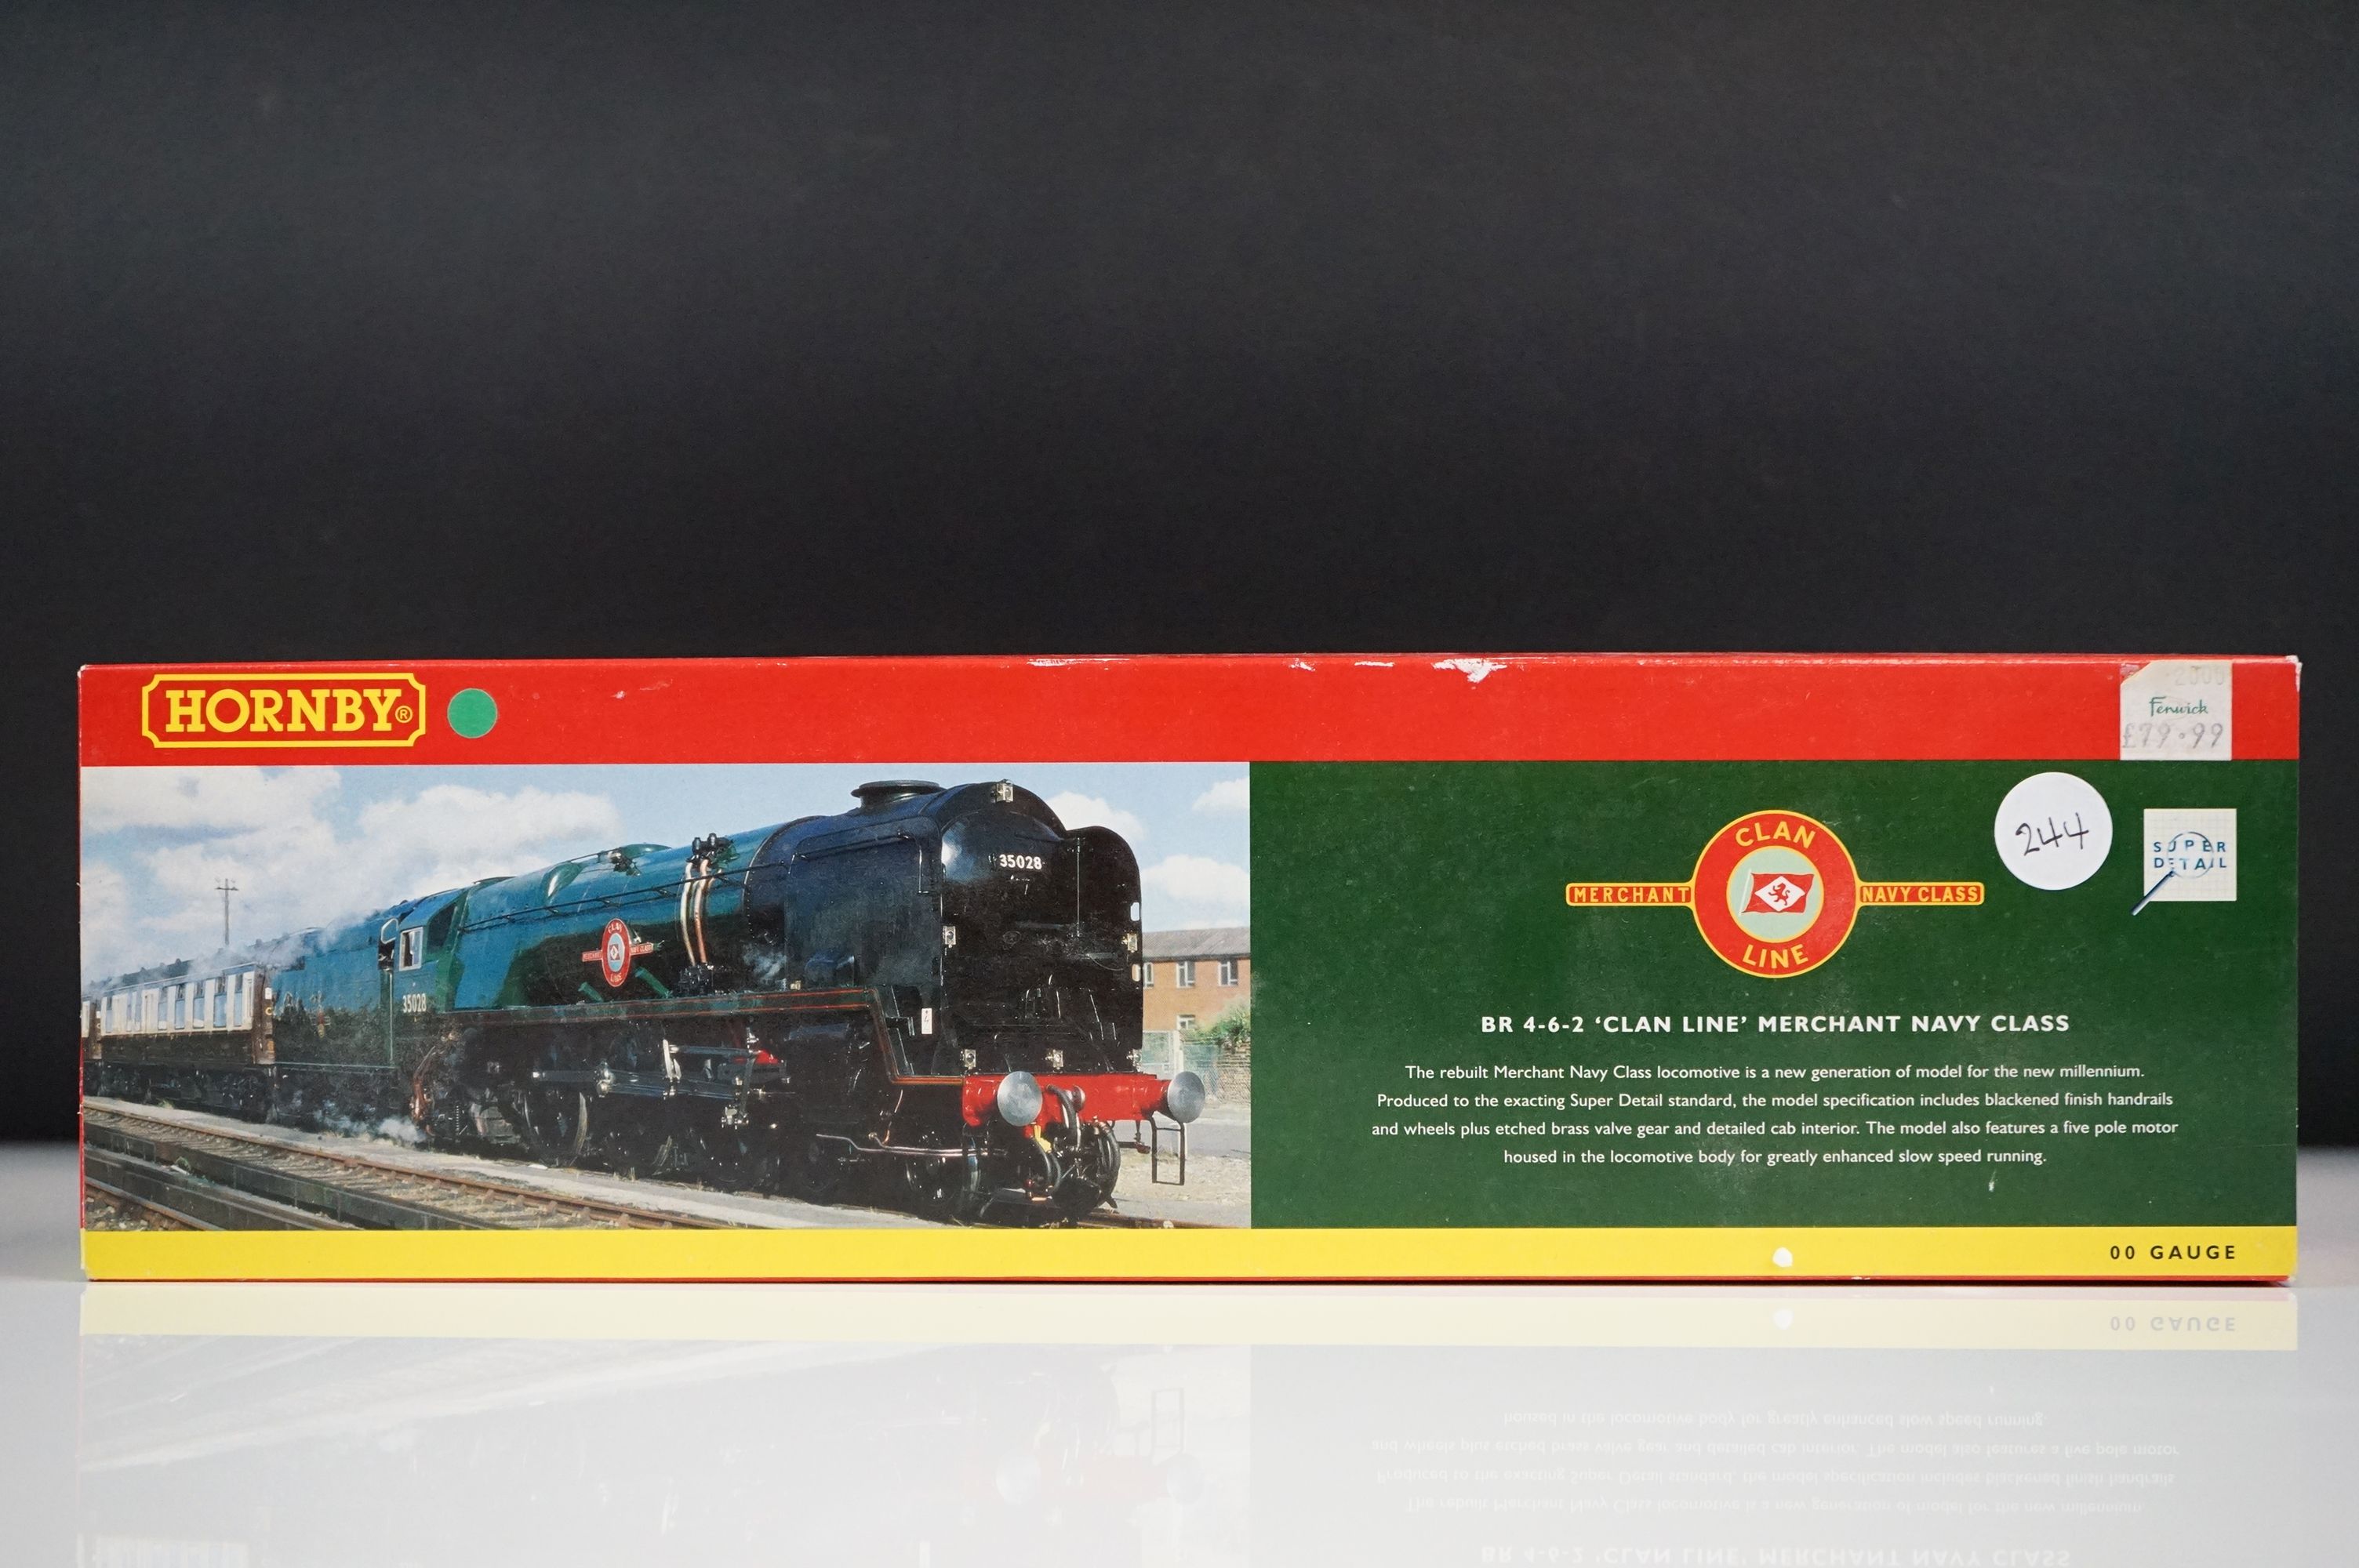 Boxed Hornby OO gauge R2169 BR 4-6-2 Clan Line Merchant Navy Class Super Detail locomotive - Image 4 of 6